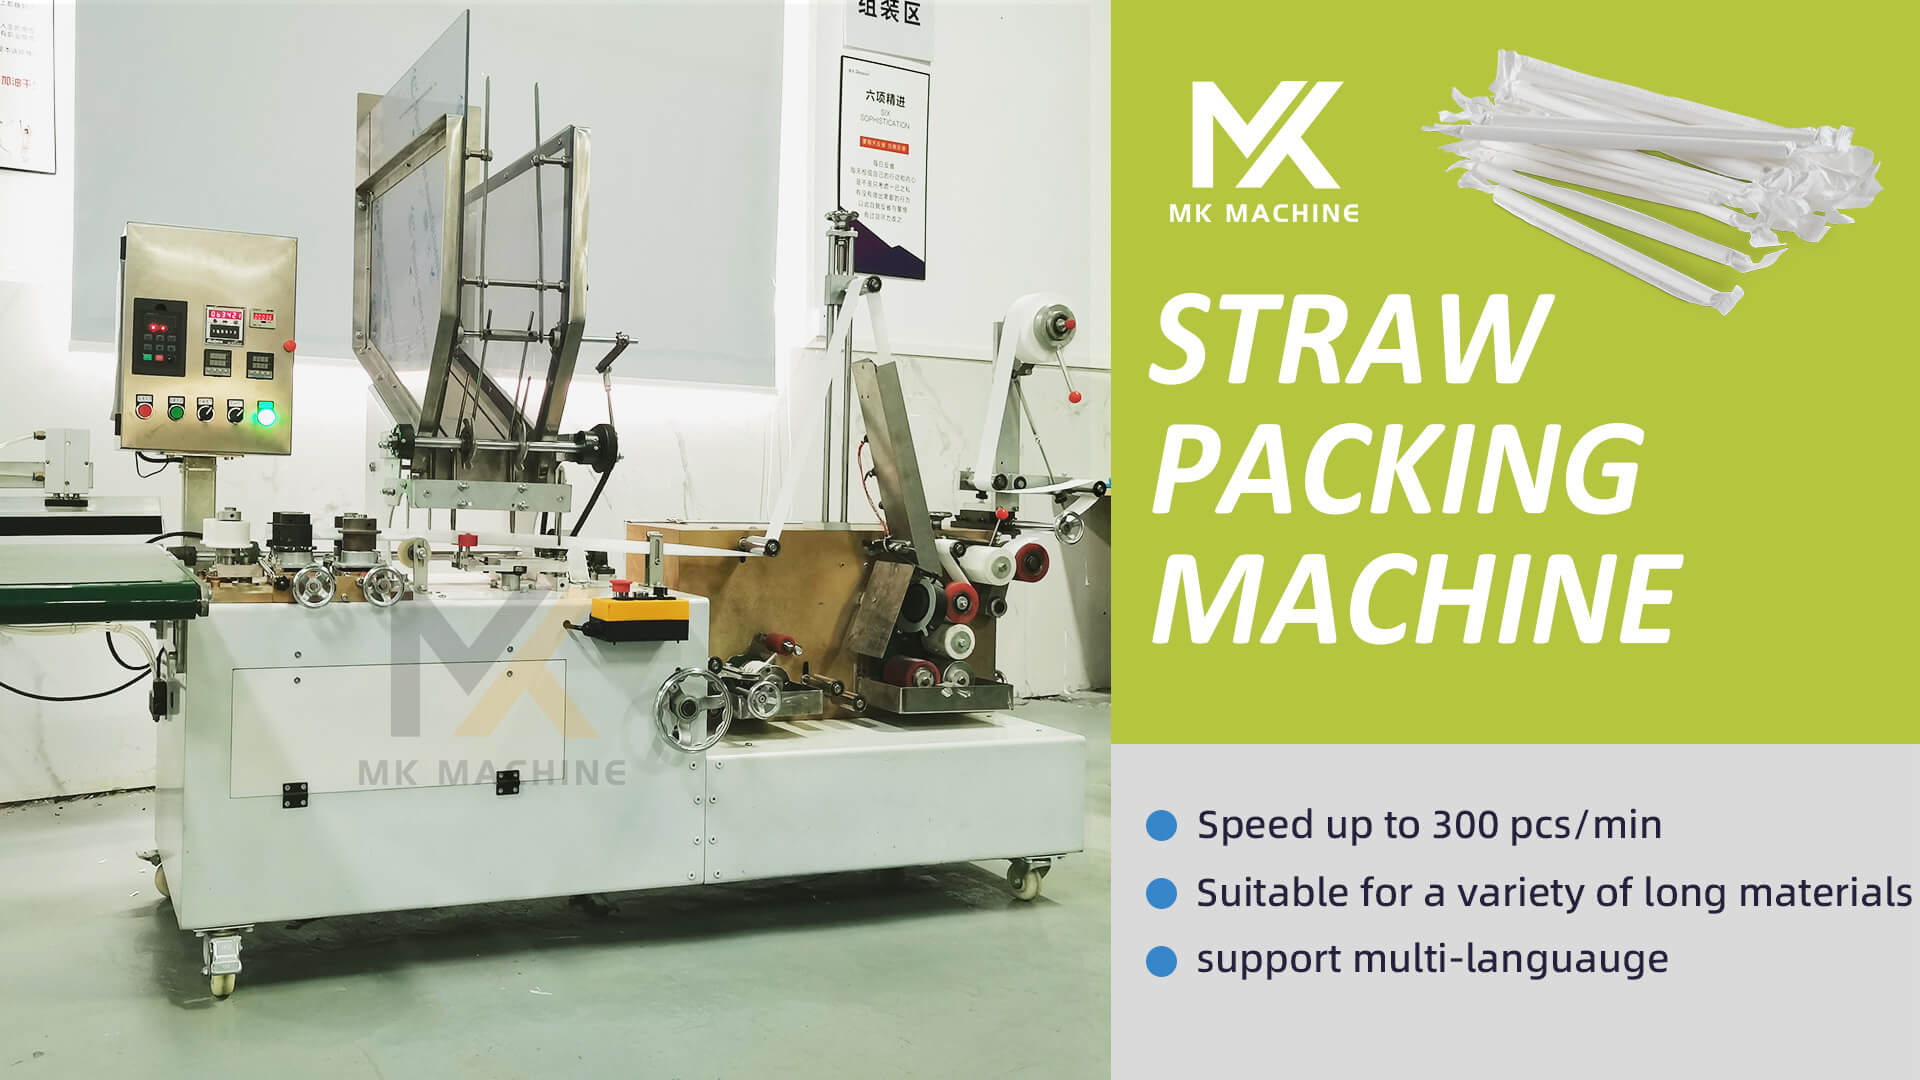 Automatic high-speed straw packing machine, chopsticks packaging bag, low cost packaging